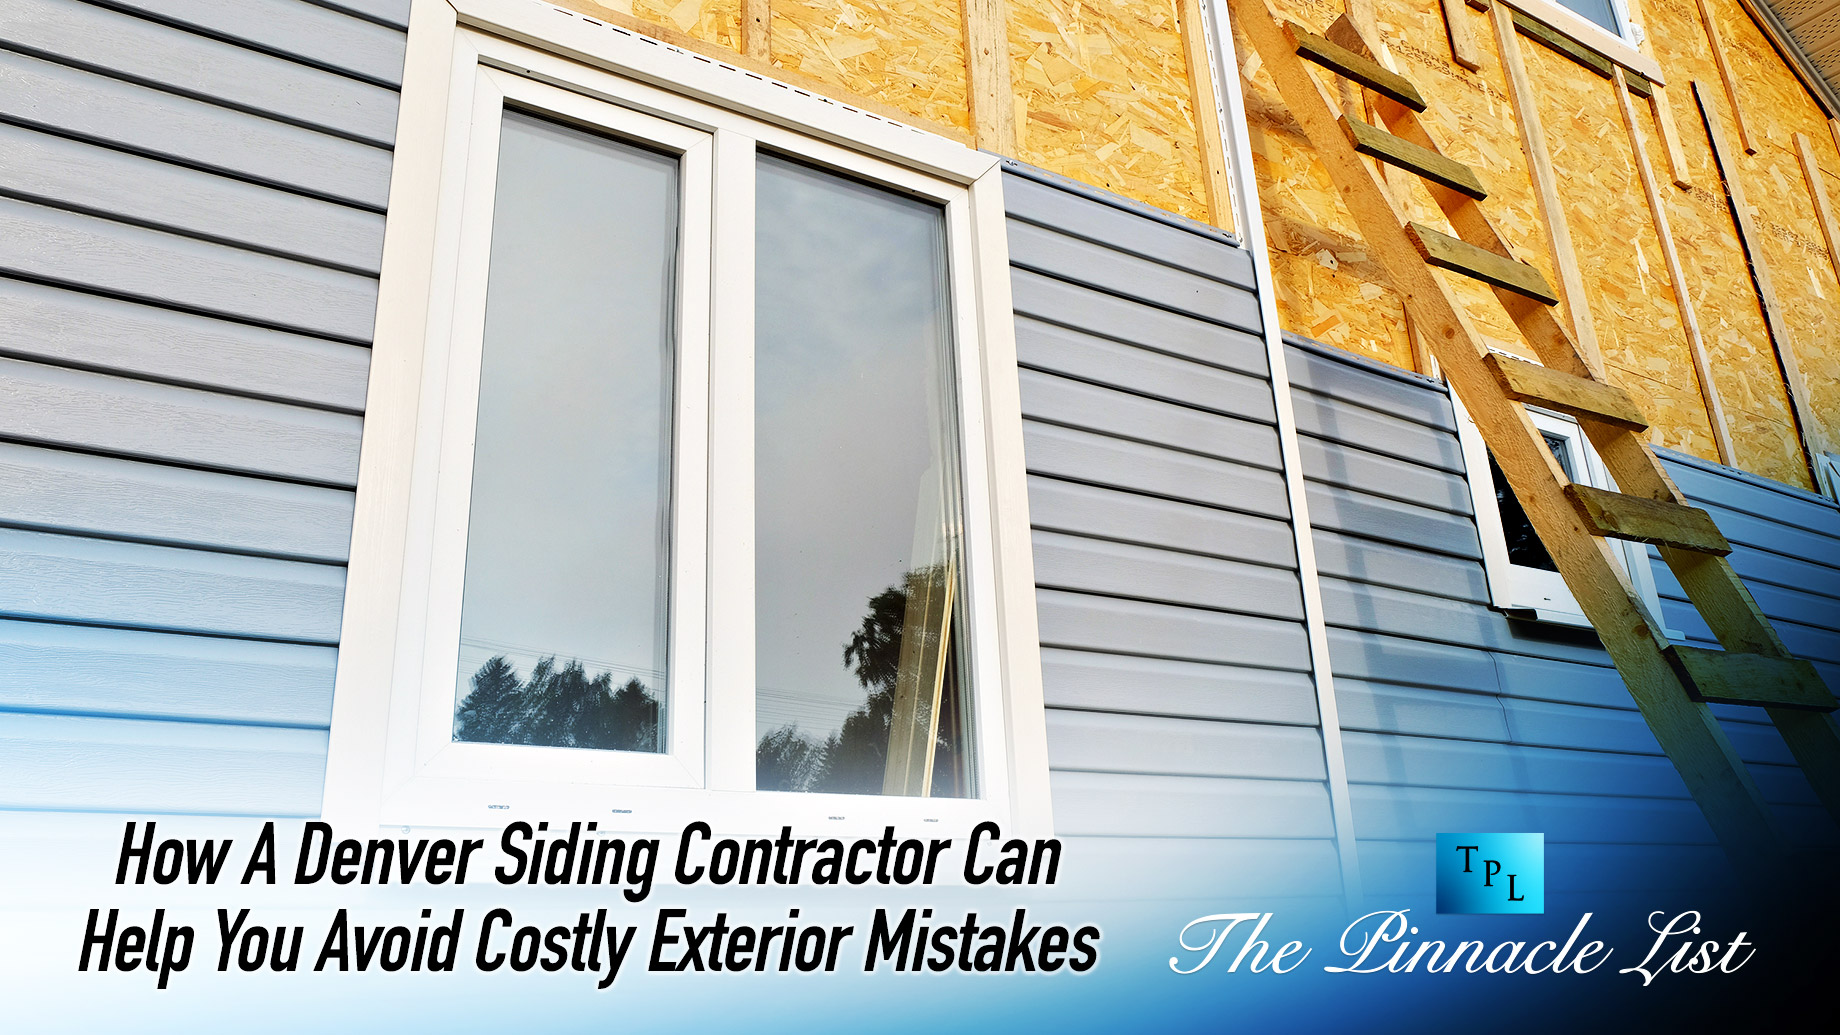 How A Denver Siding Contractor Can Help You Avoid Costly Exterior Mistakes